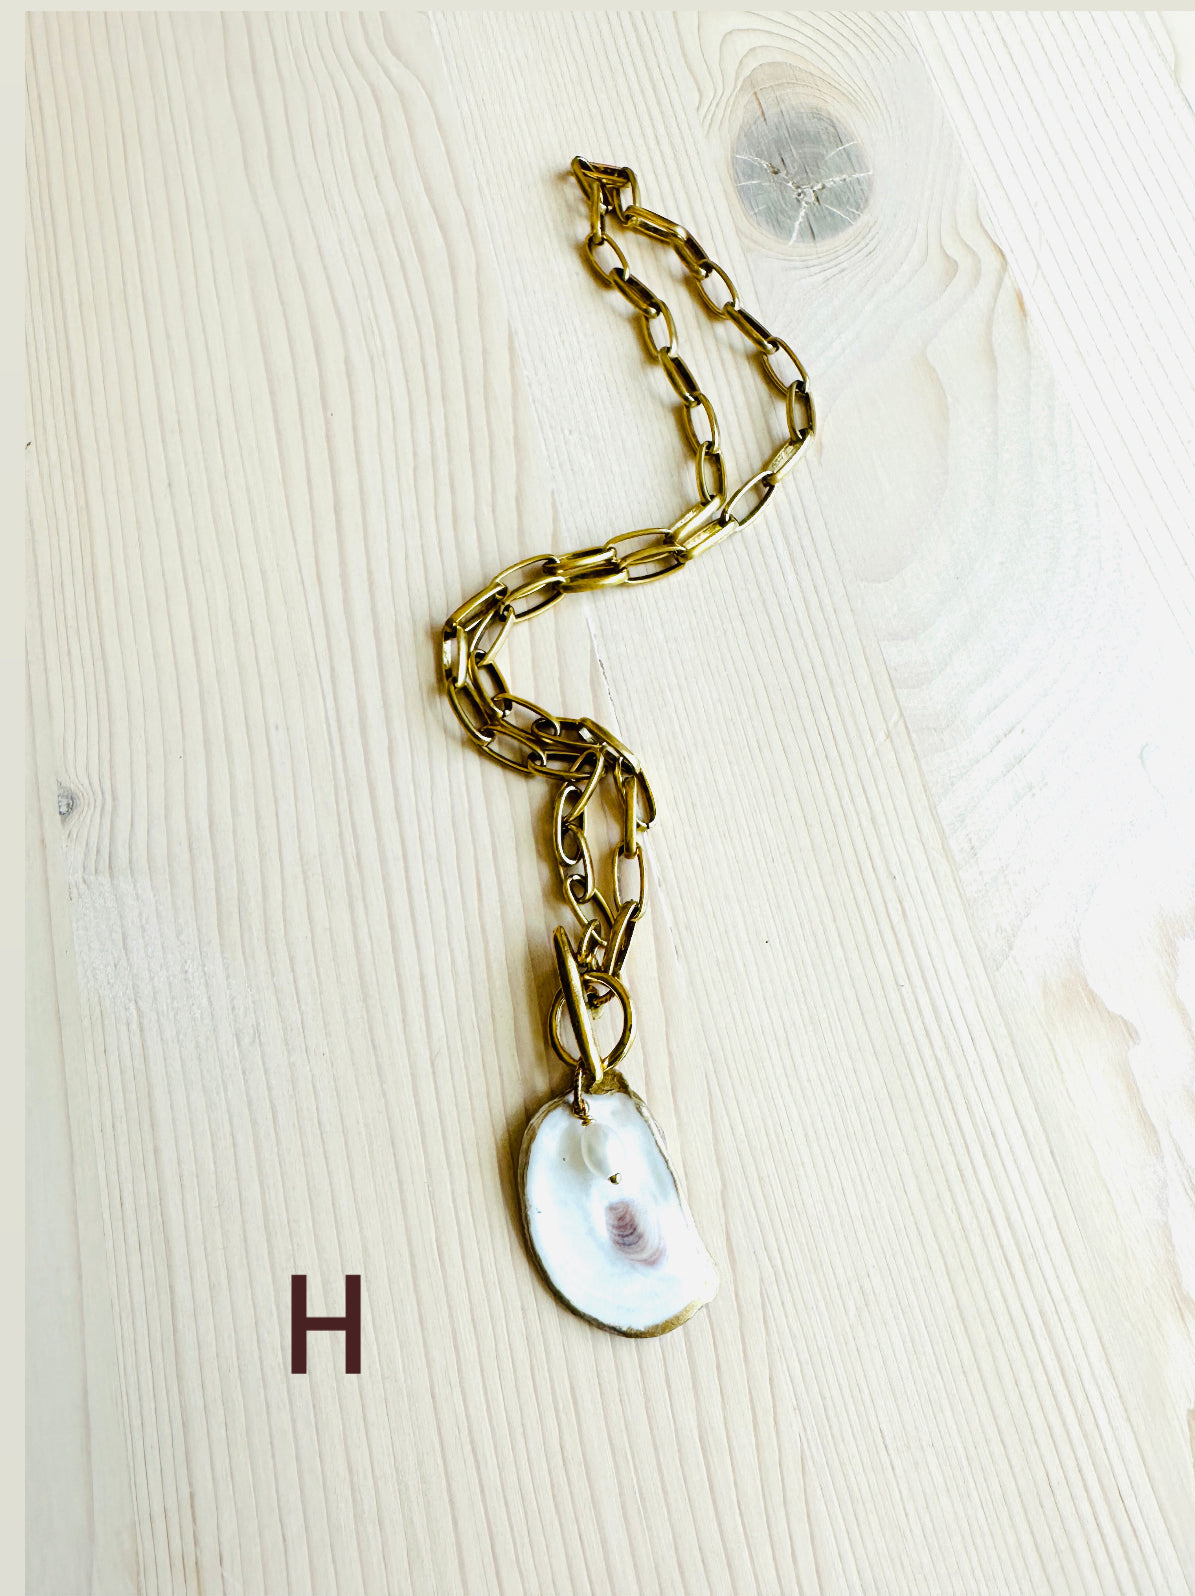 Charleston Oyster Shell Necklaces